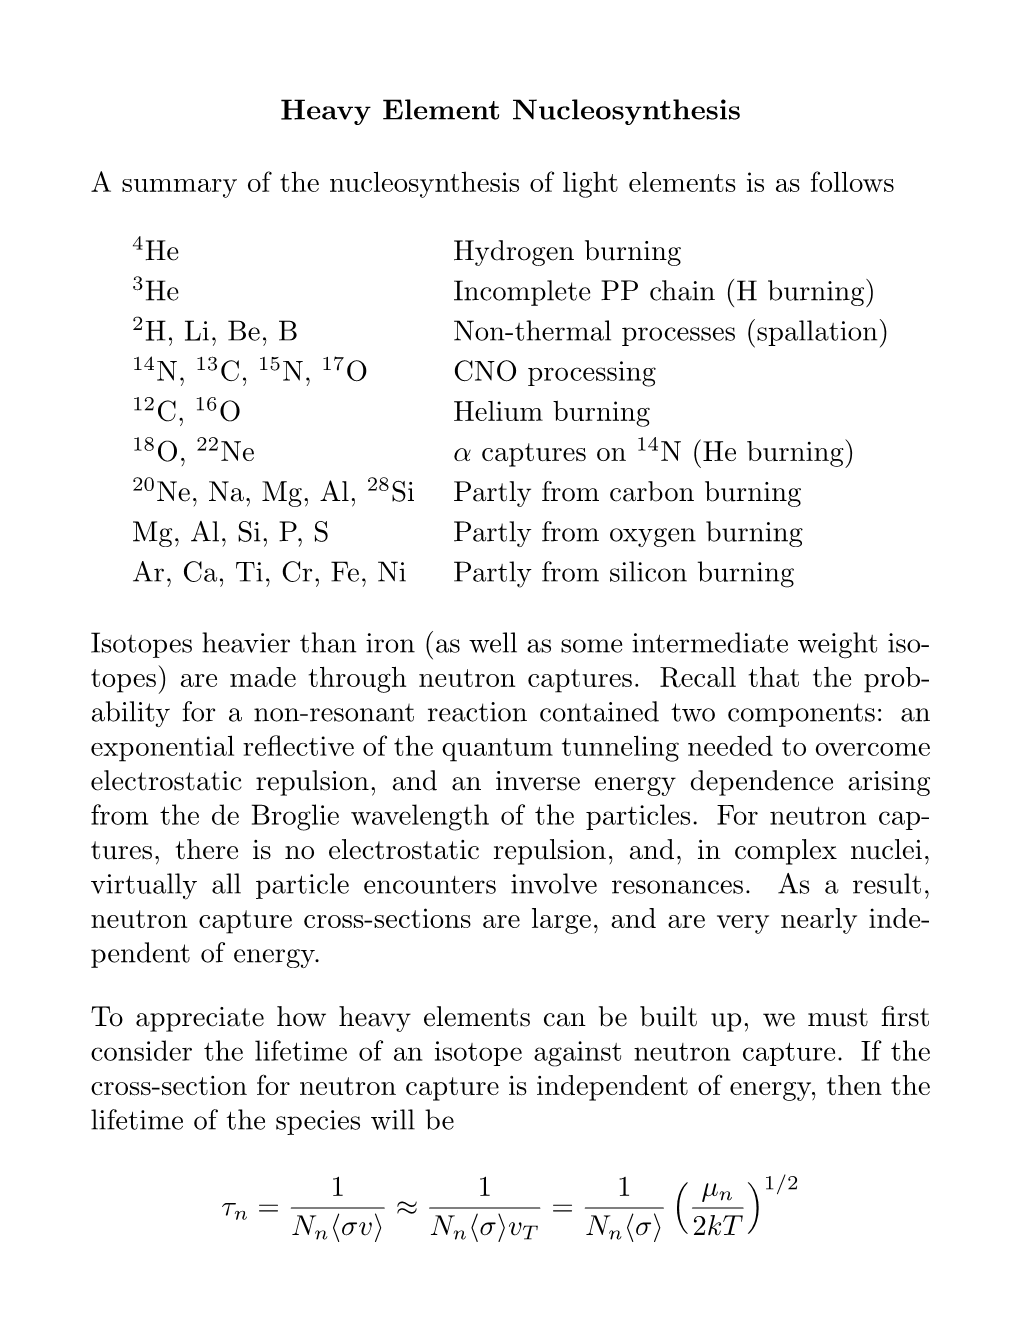 Heavy Element Nucleosynthesis